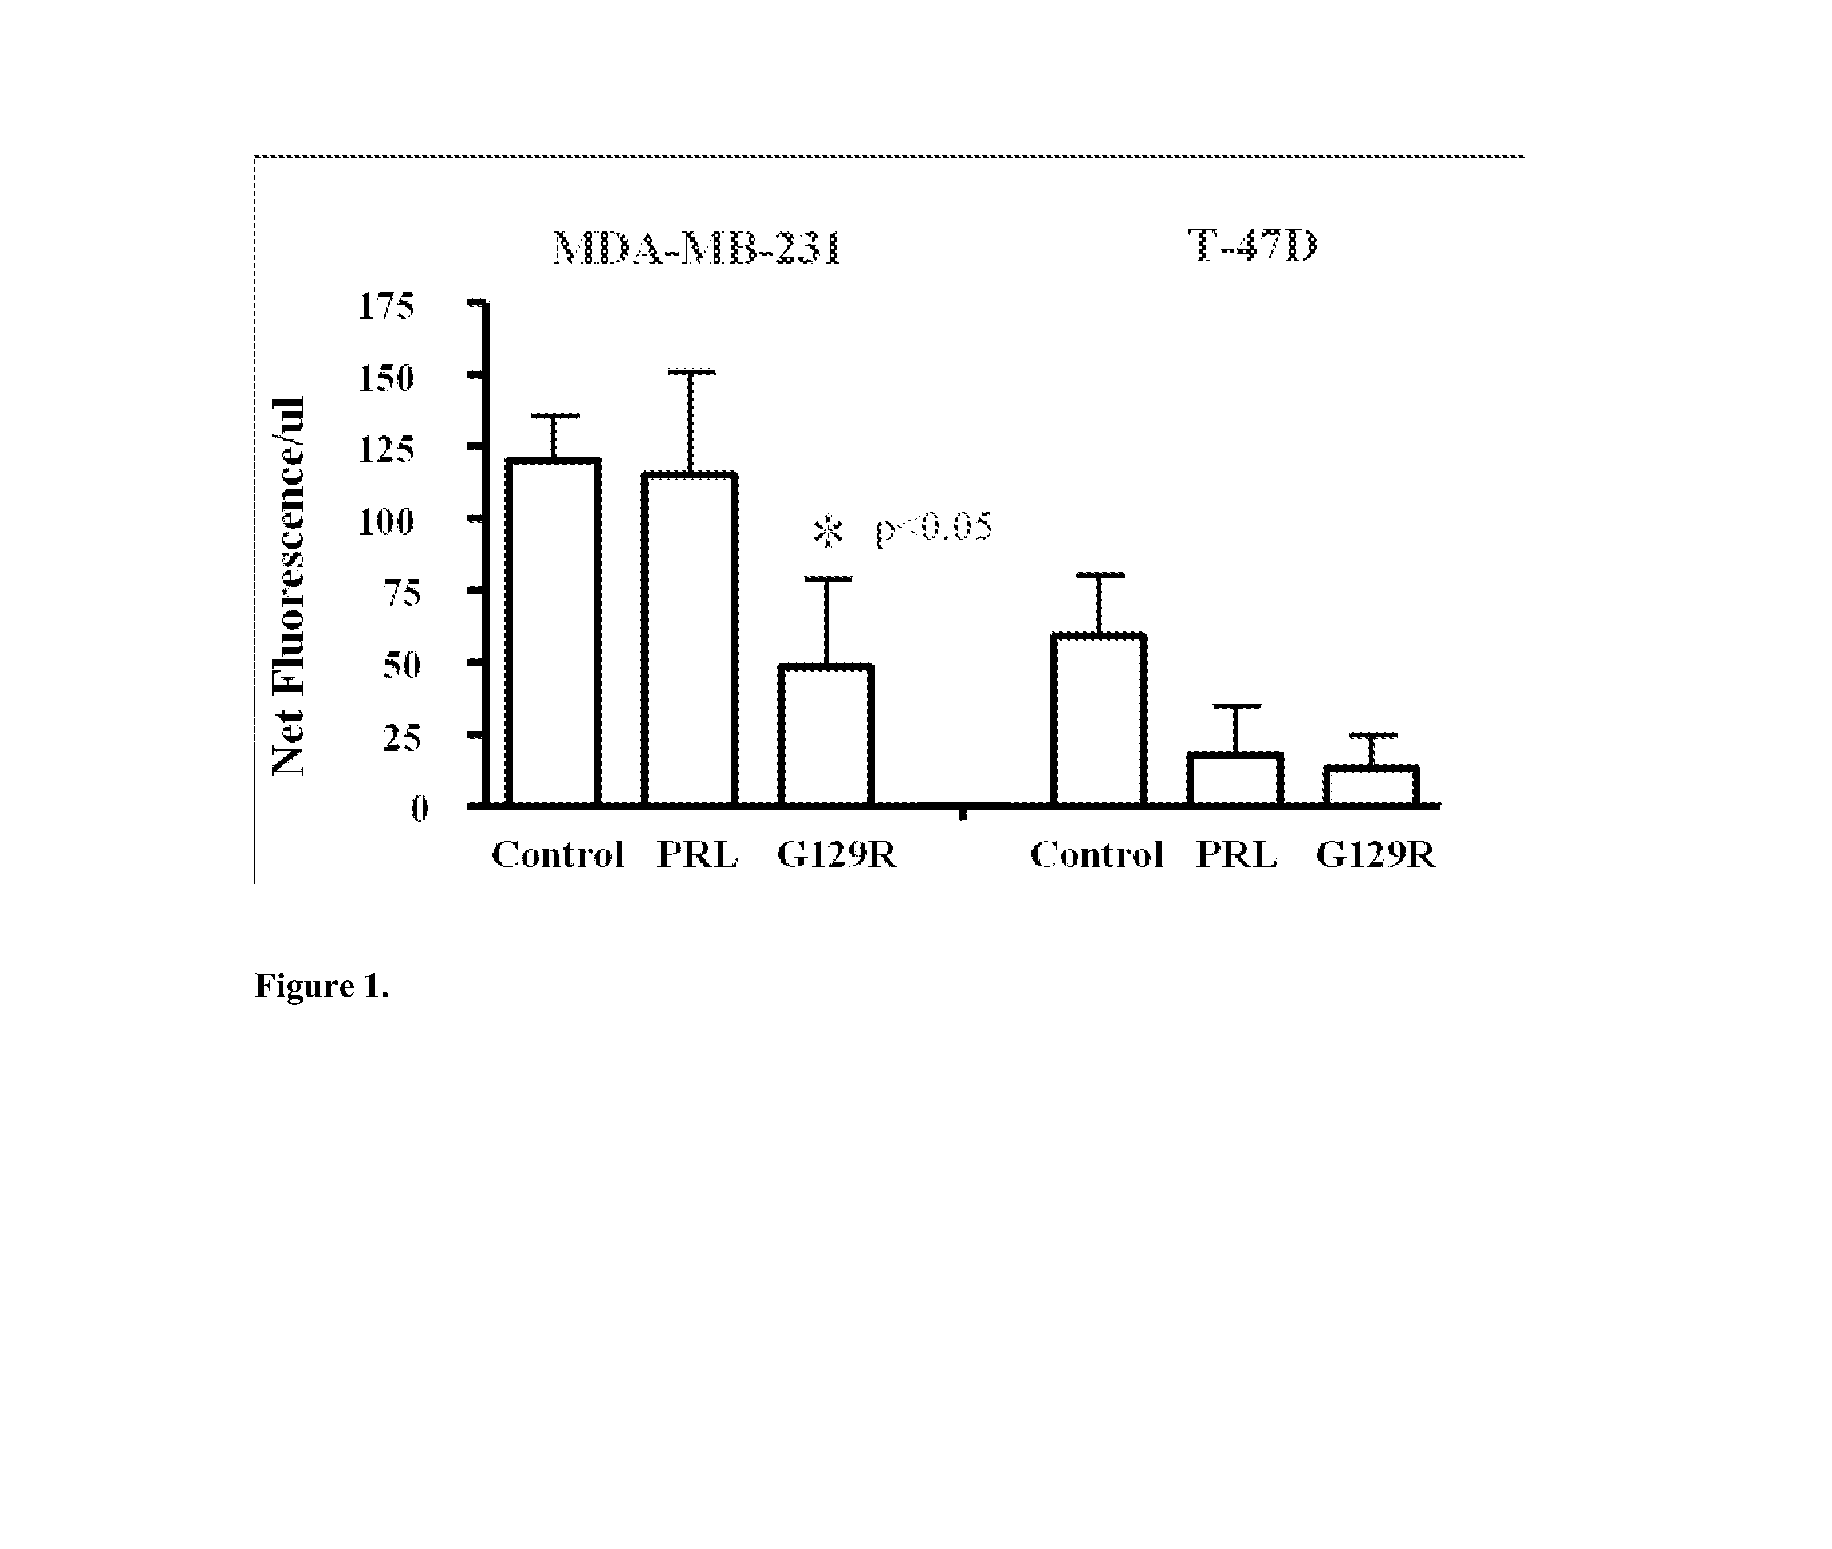 Use of Prolactin Receptor Antagonist and Chemotherapeutic Drug for Treating Ovarian Cancer